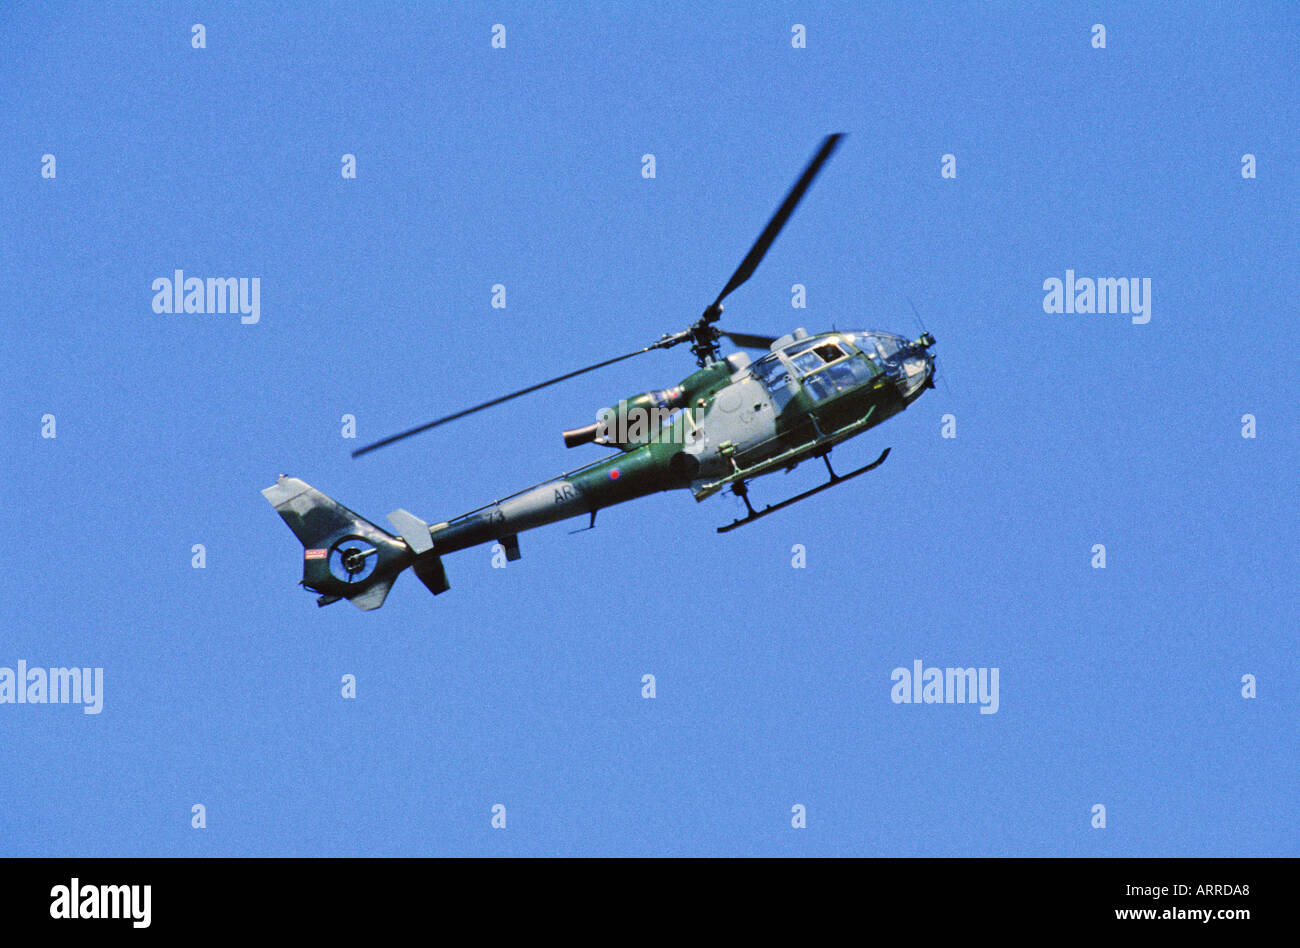 Royal Army Gazelle helicopter Stock Photo